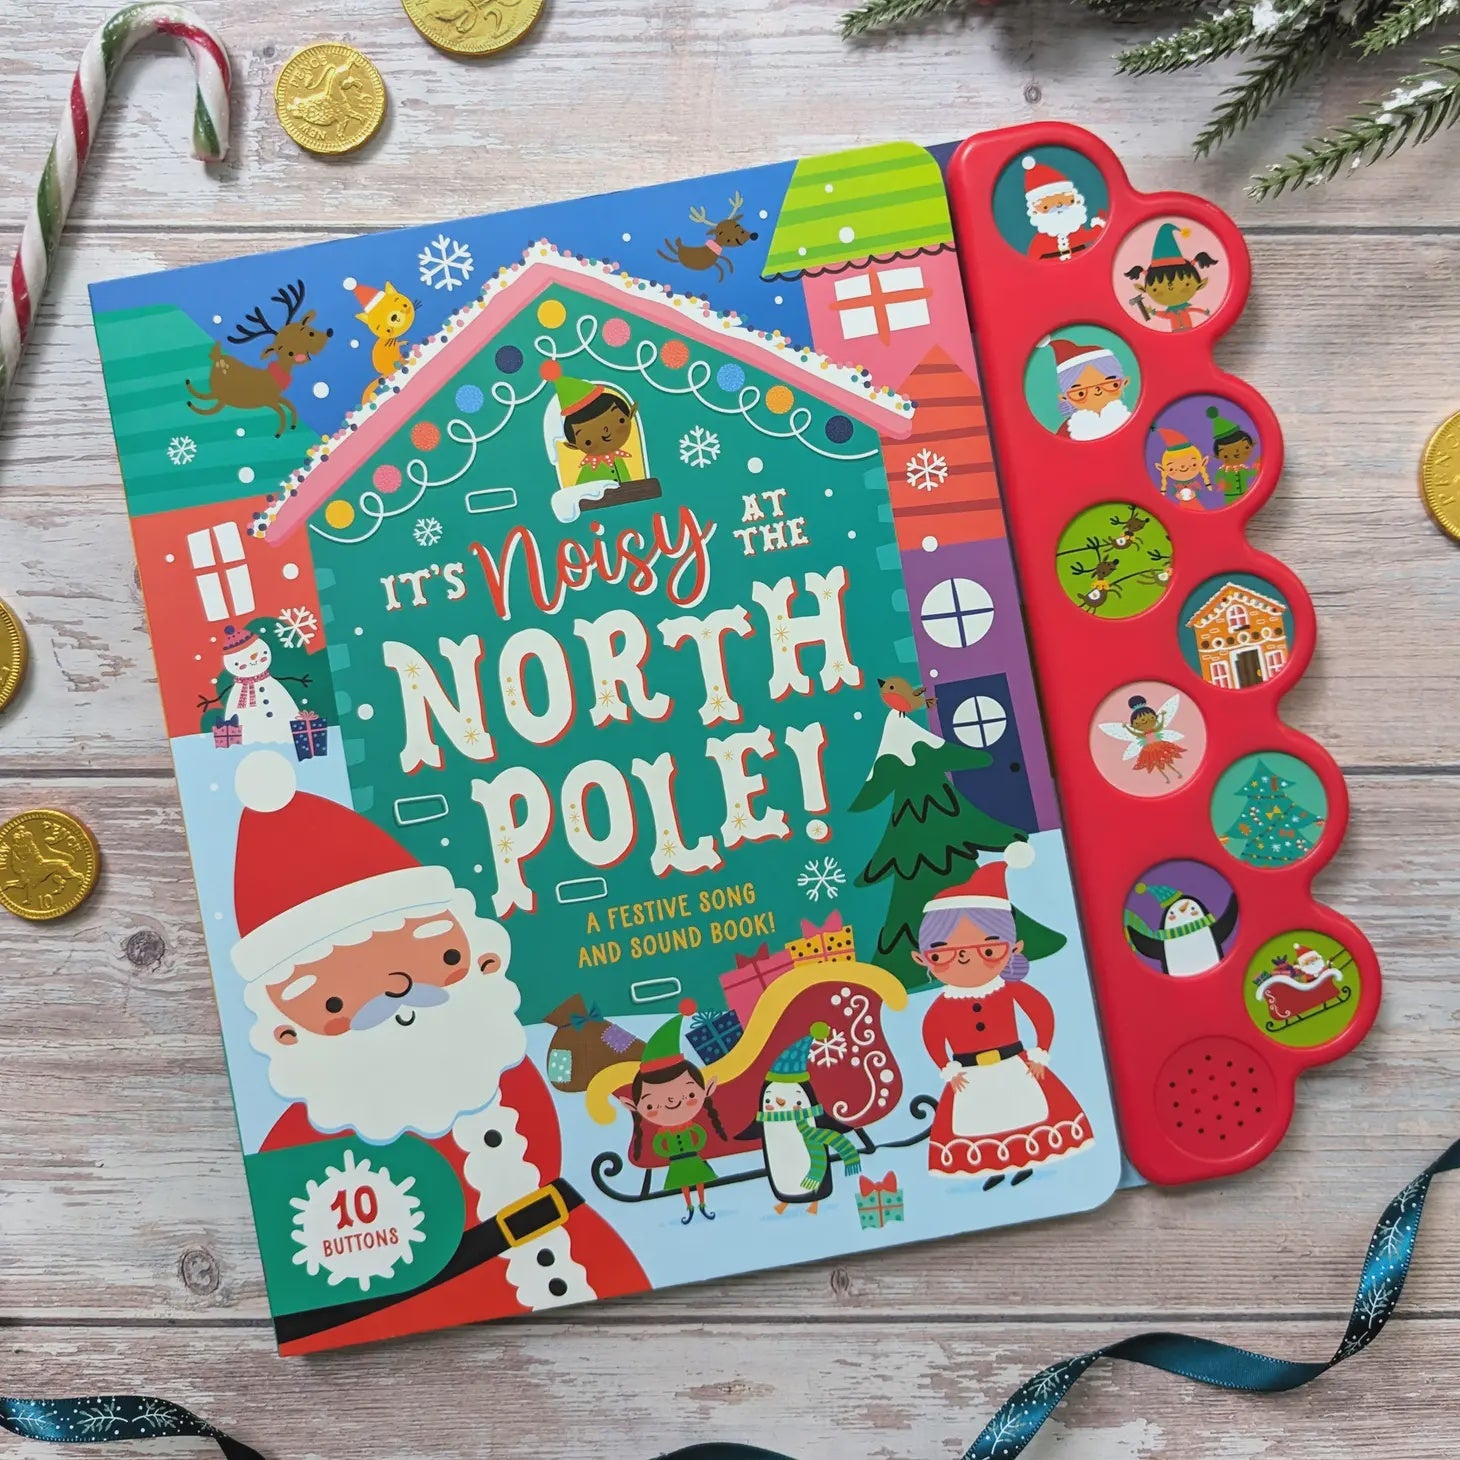 It's Noisy at the North Pole-Sound Book